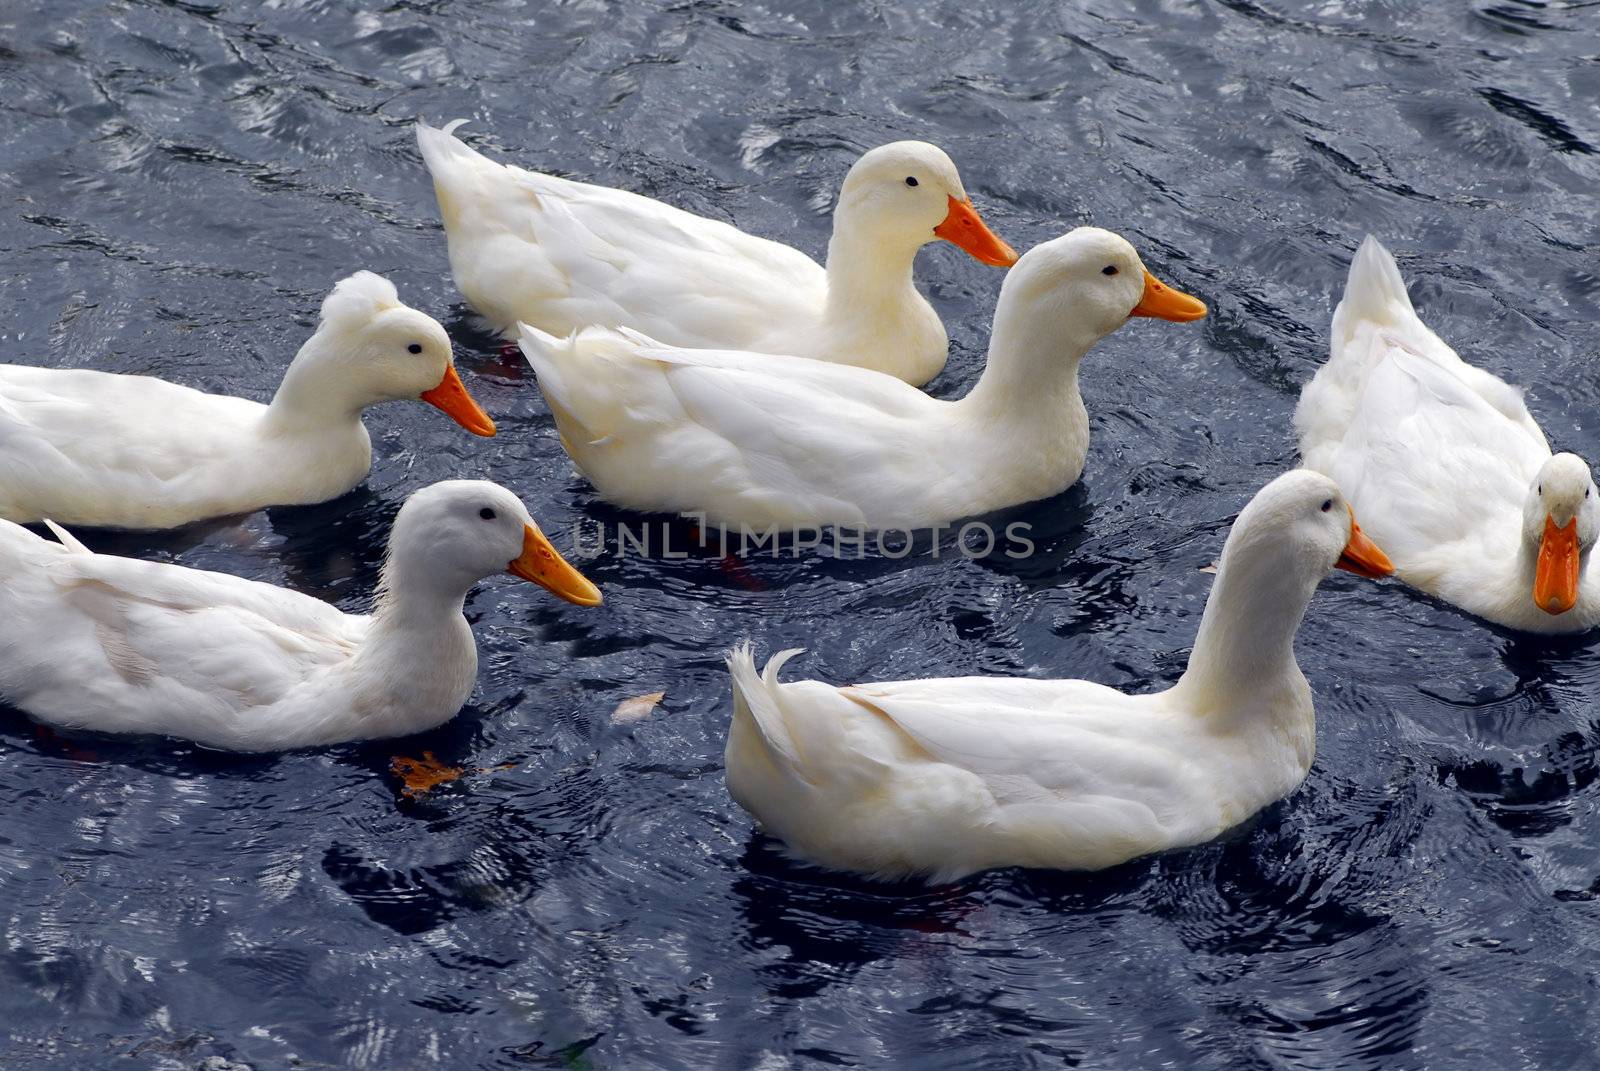 Flock of white ducks swimming in the pond